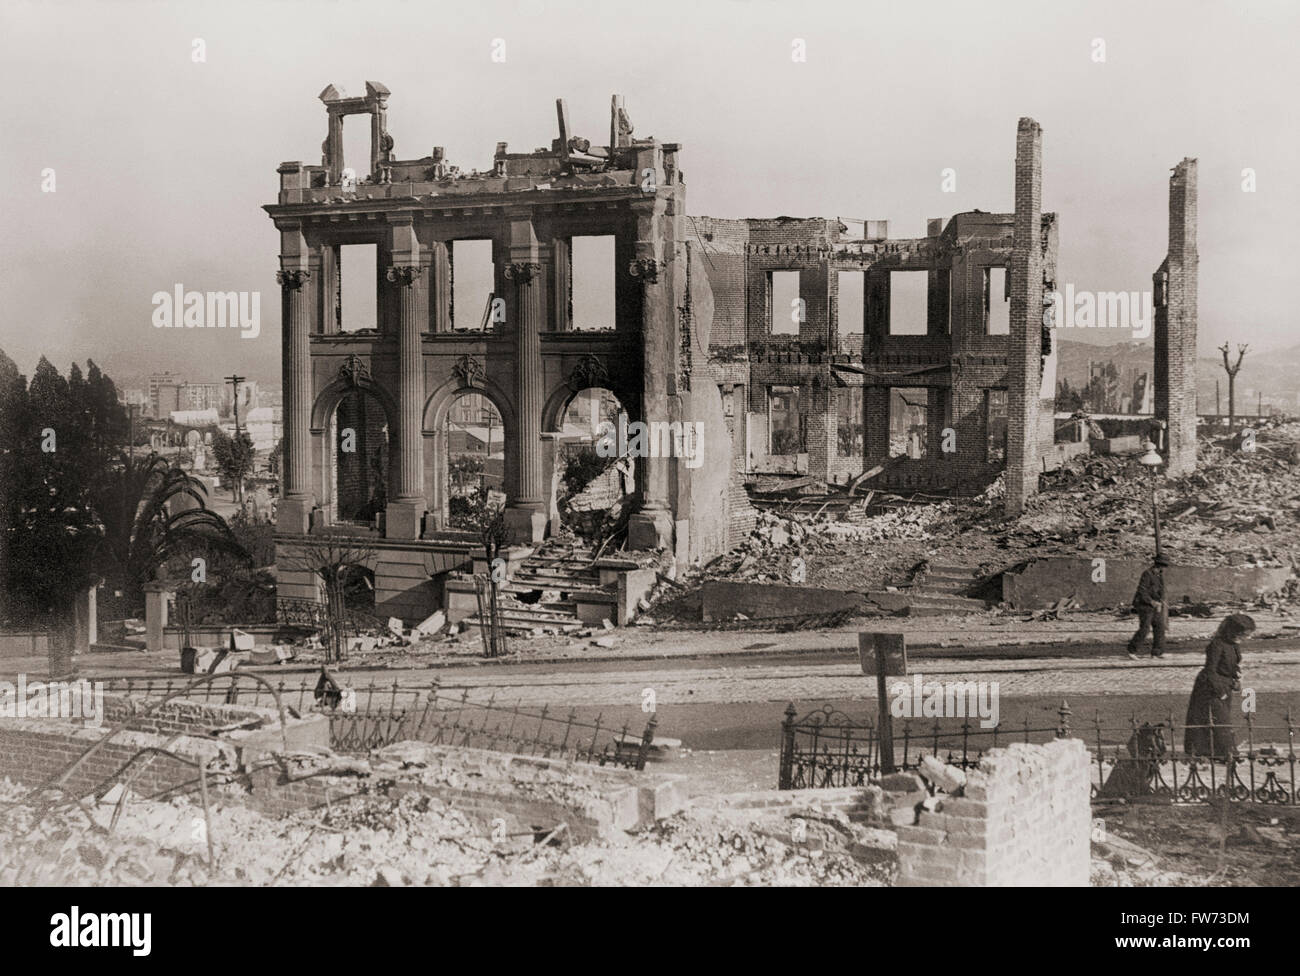 Ruins in San Francisco, California, United States of America, after the earthquake of April 18, 1906.  After an original photograph by photographer Arnold Genthe, 1869-1942. Stock Photo